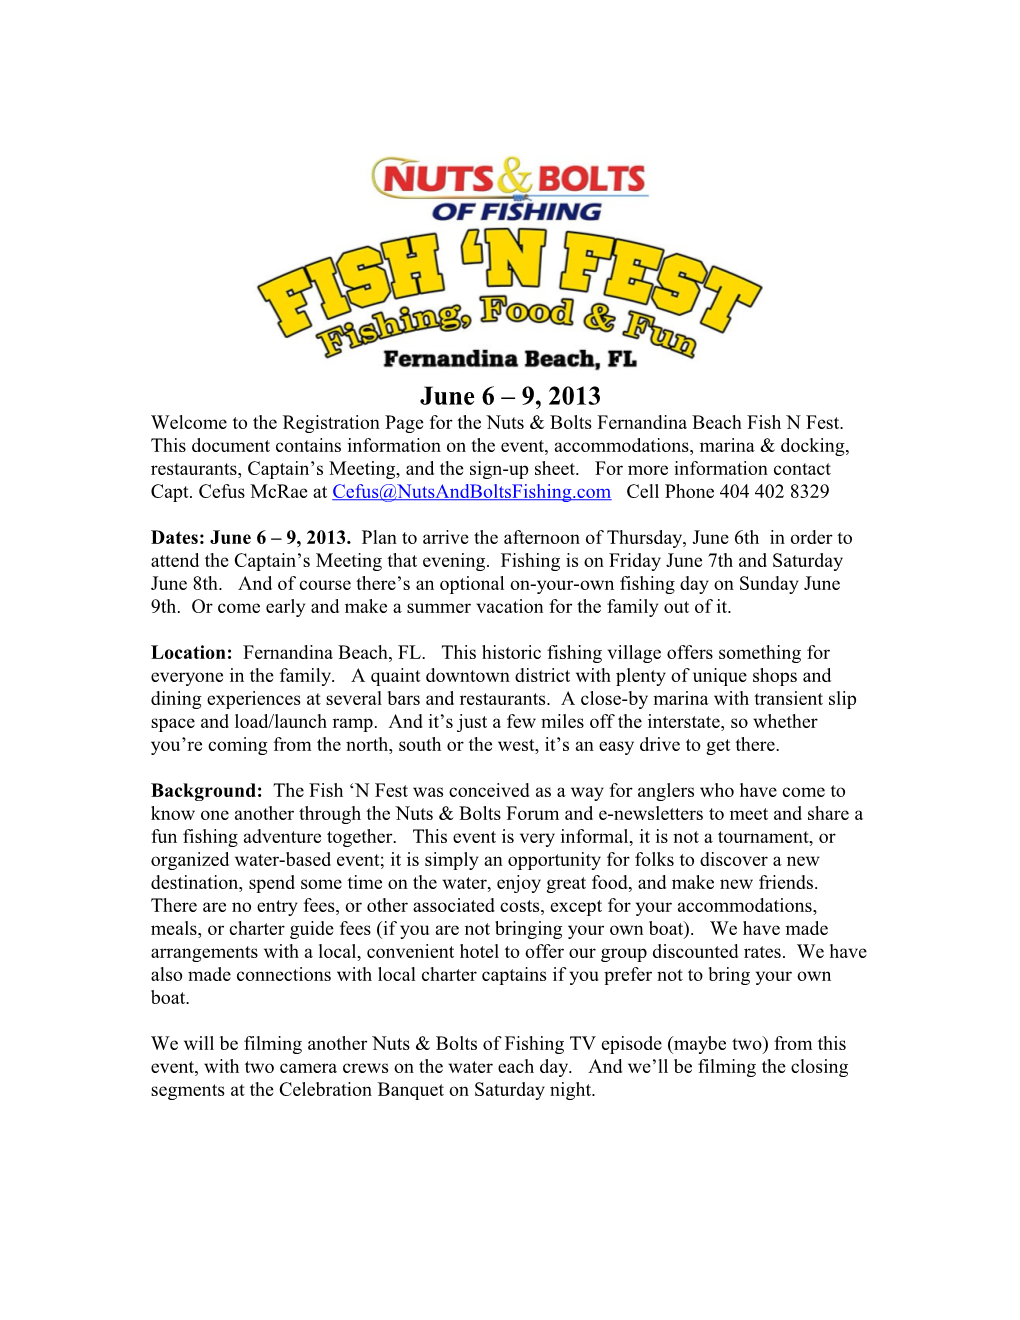 Welcome to the Registration Page for the Nuts & Bolts Fernandina Beach Fish N Fest. This